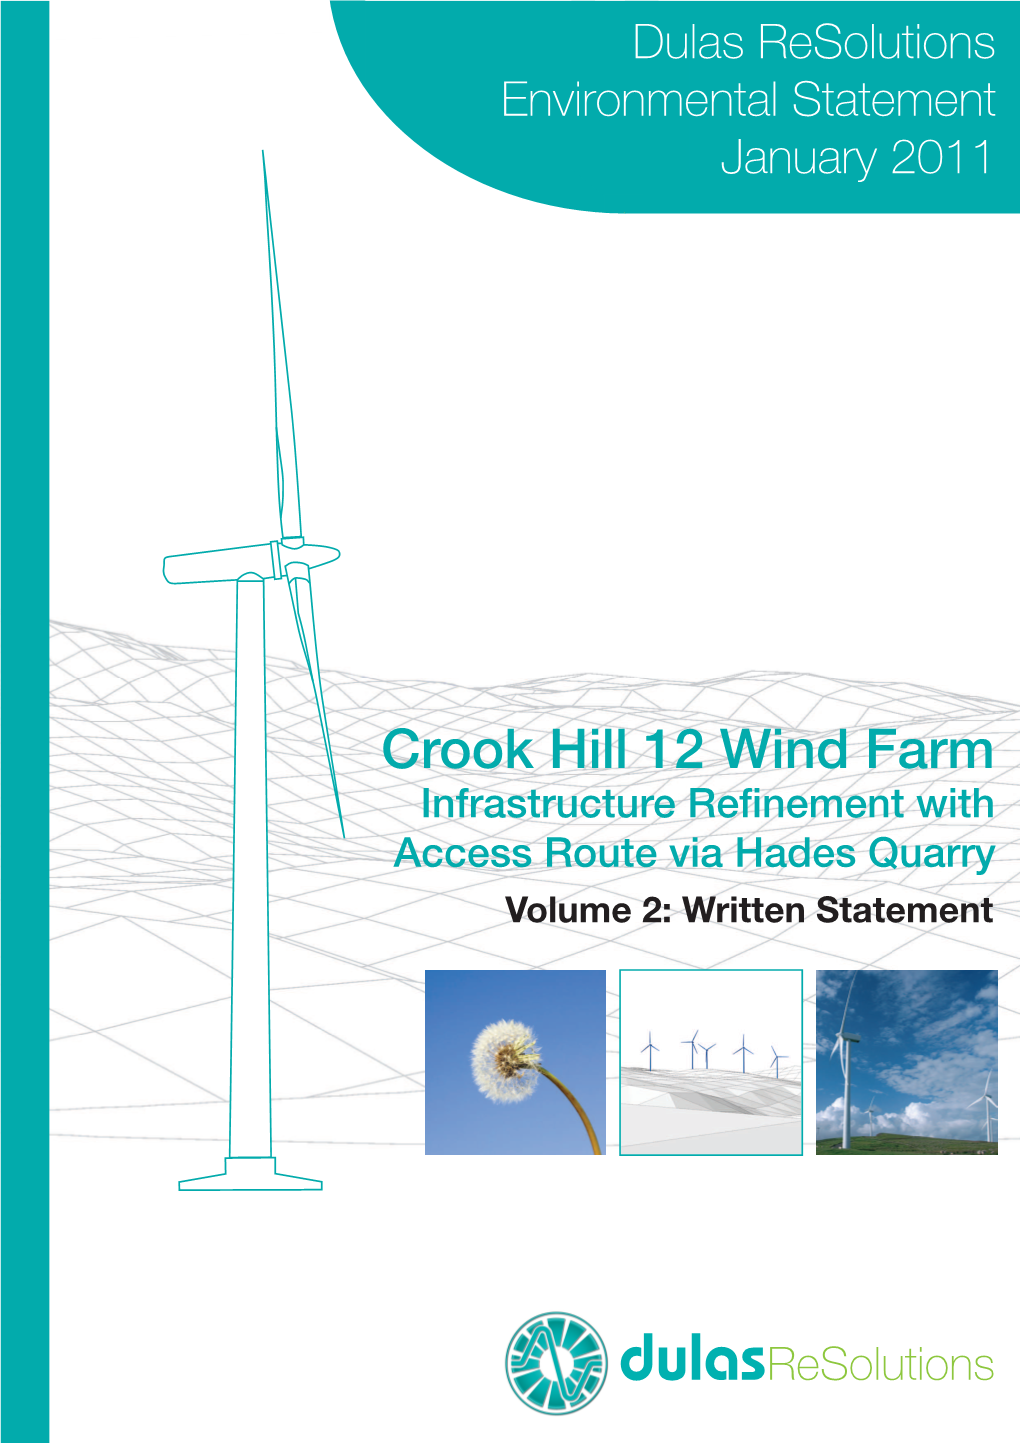 Crook Hill 12 Wind Farm Infrastructure Refinement with Access Route Via Hades Quarry Volume 2: Written Statement